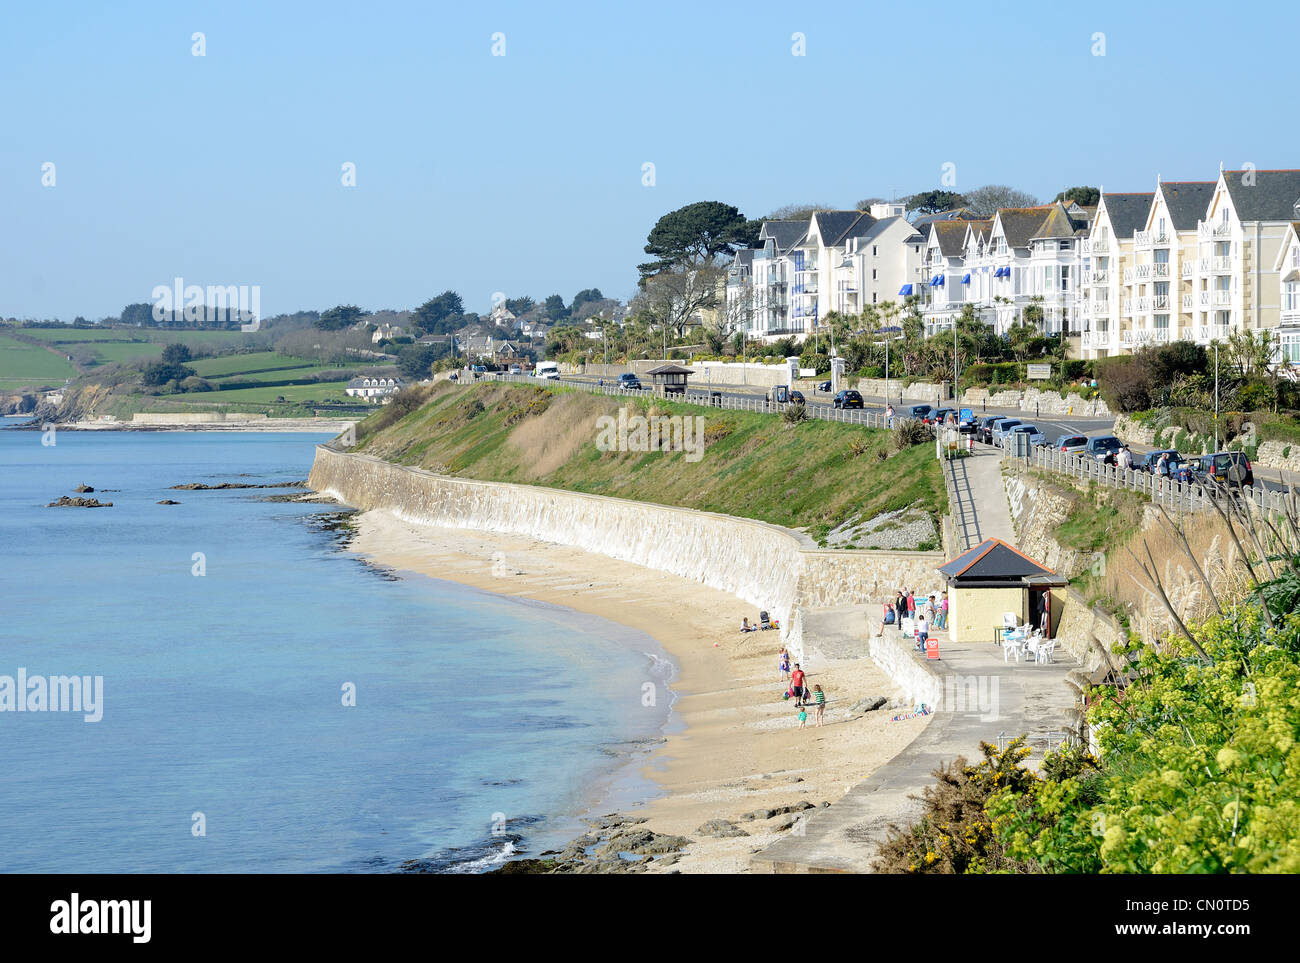 Castle beach on Cliff road in Falmouth, Cornwall, UK Stock Photo